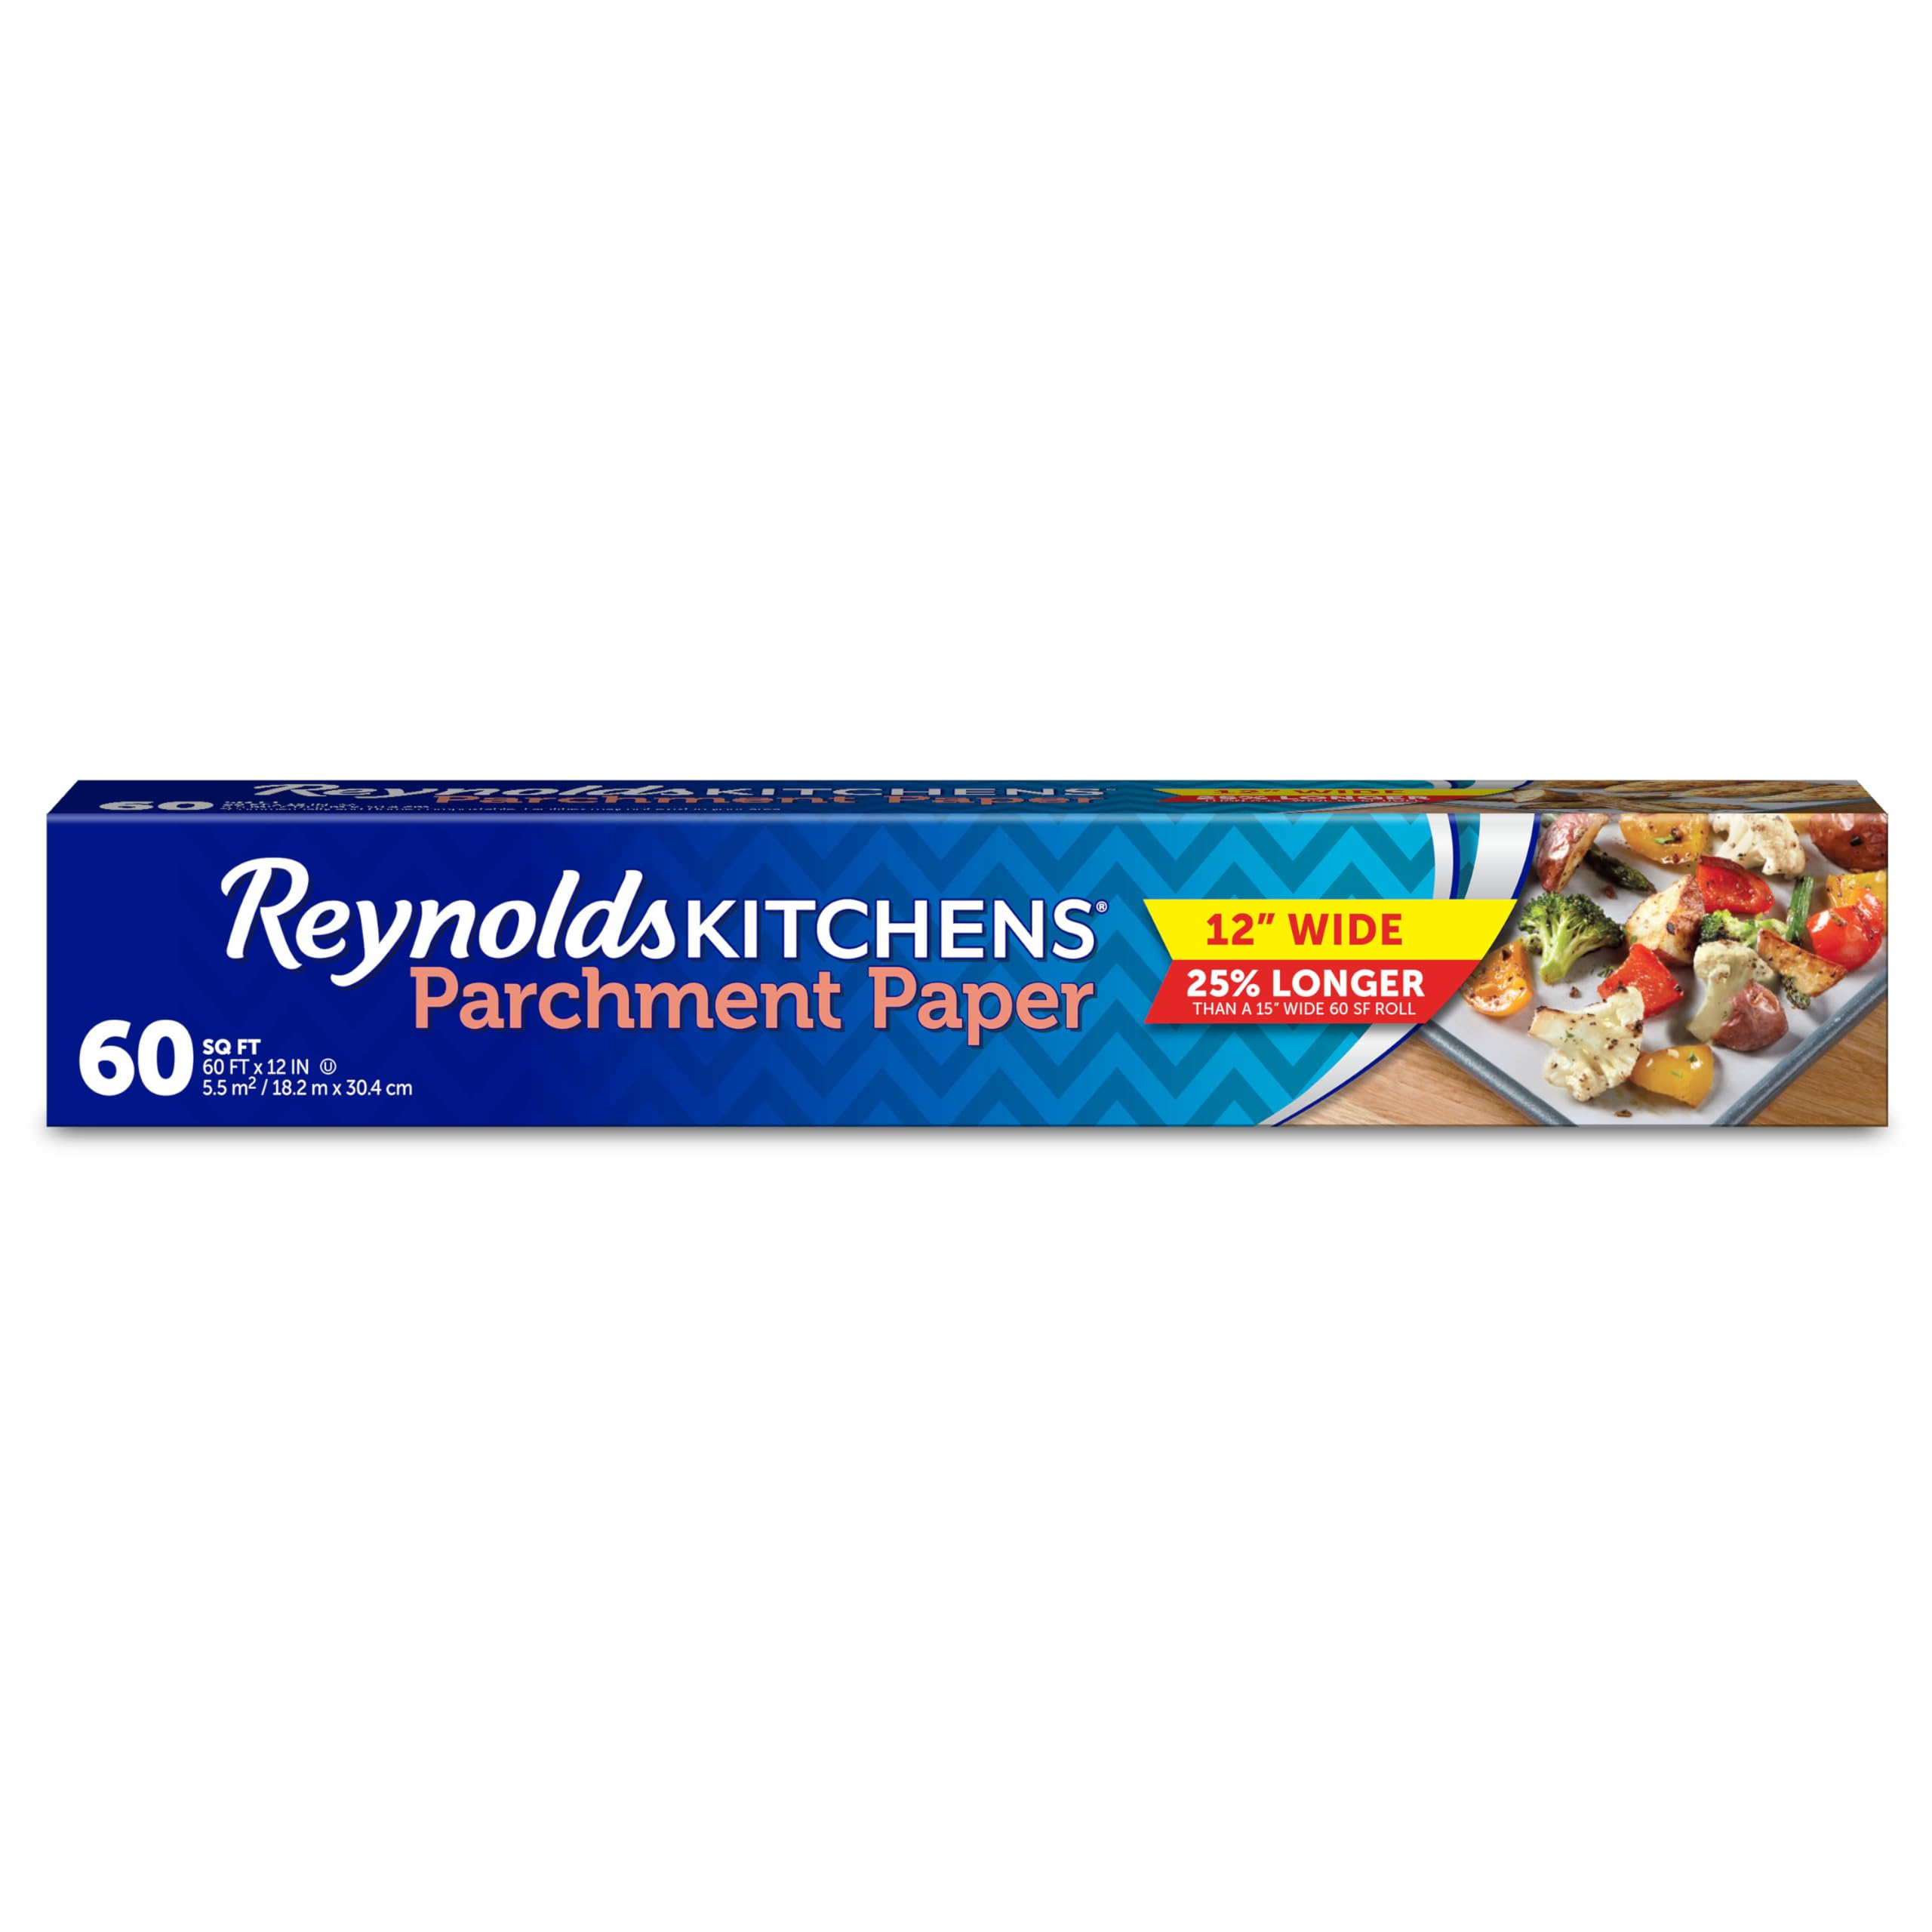 Reynolds Kitchens Parchment Paper Roll, 60 Square Feet $3.79